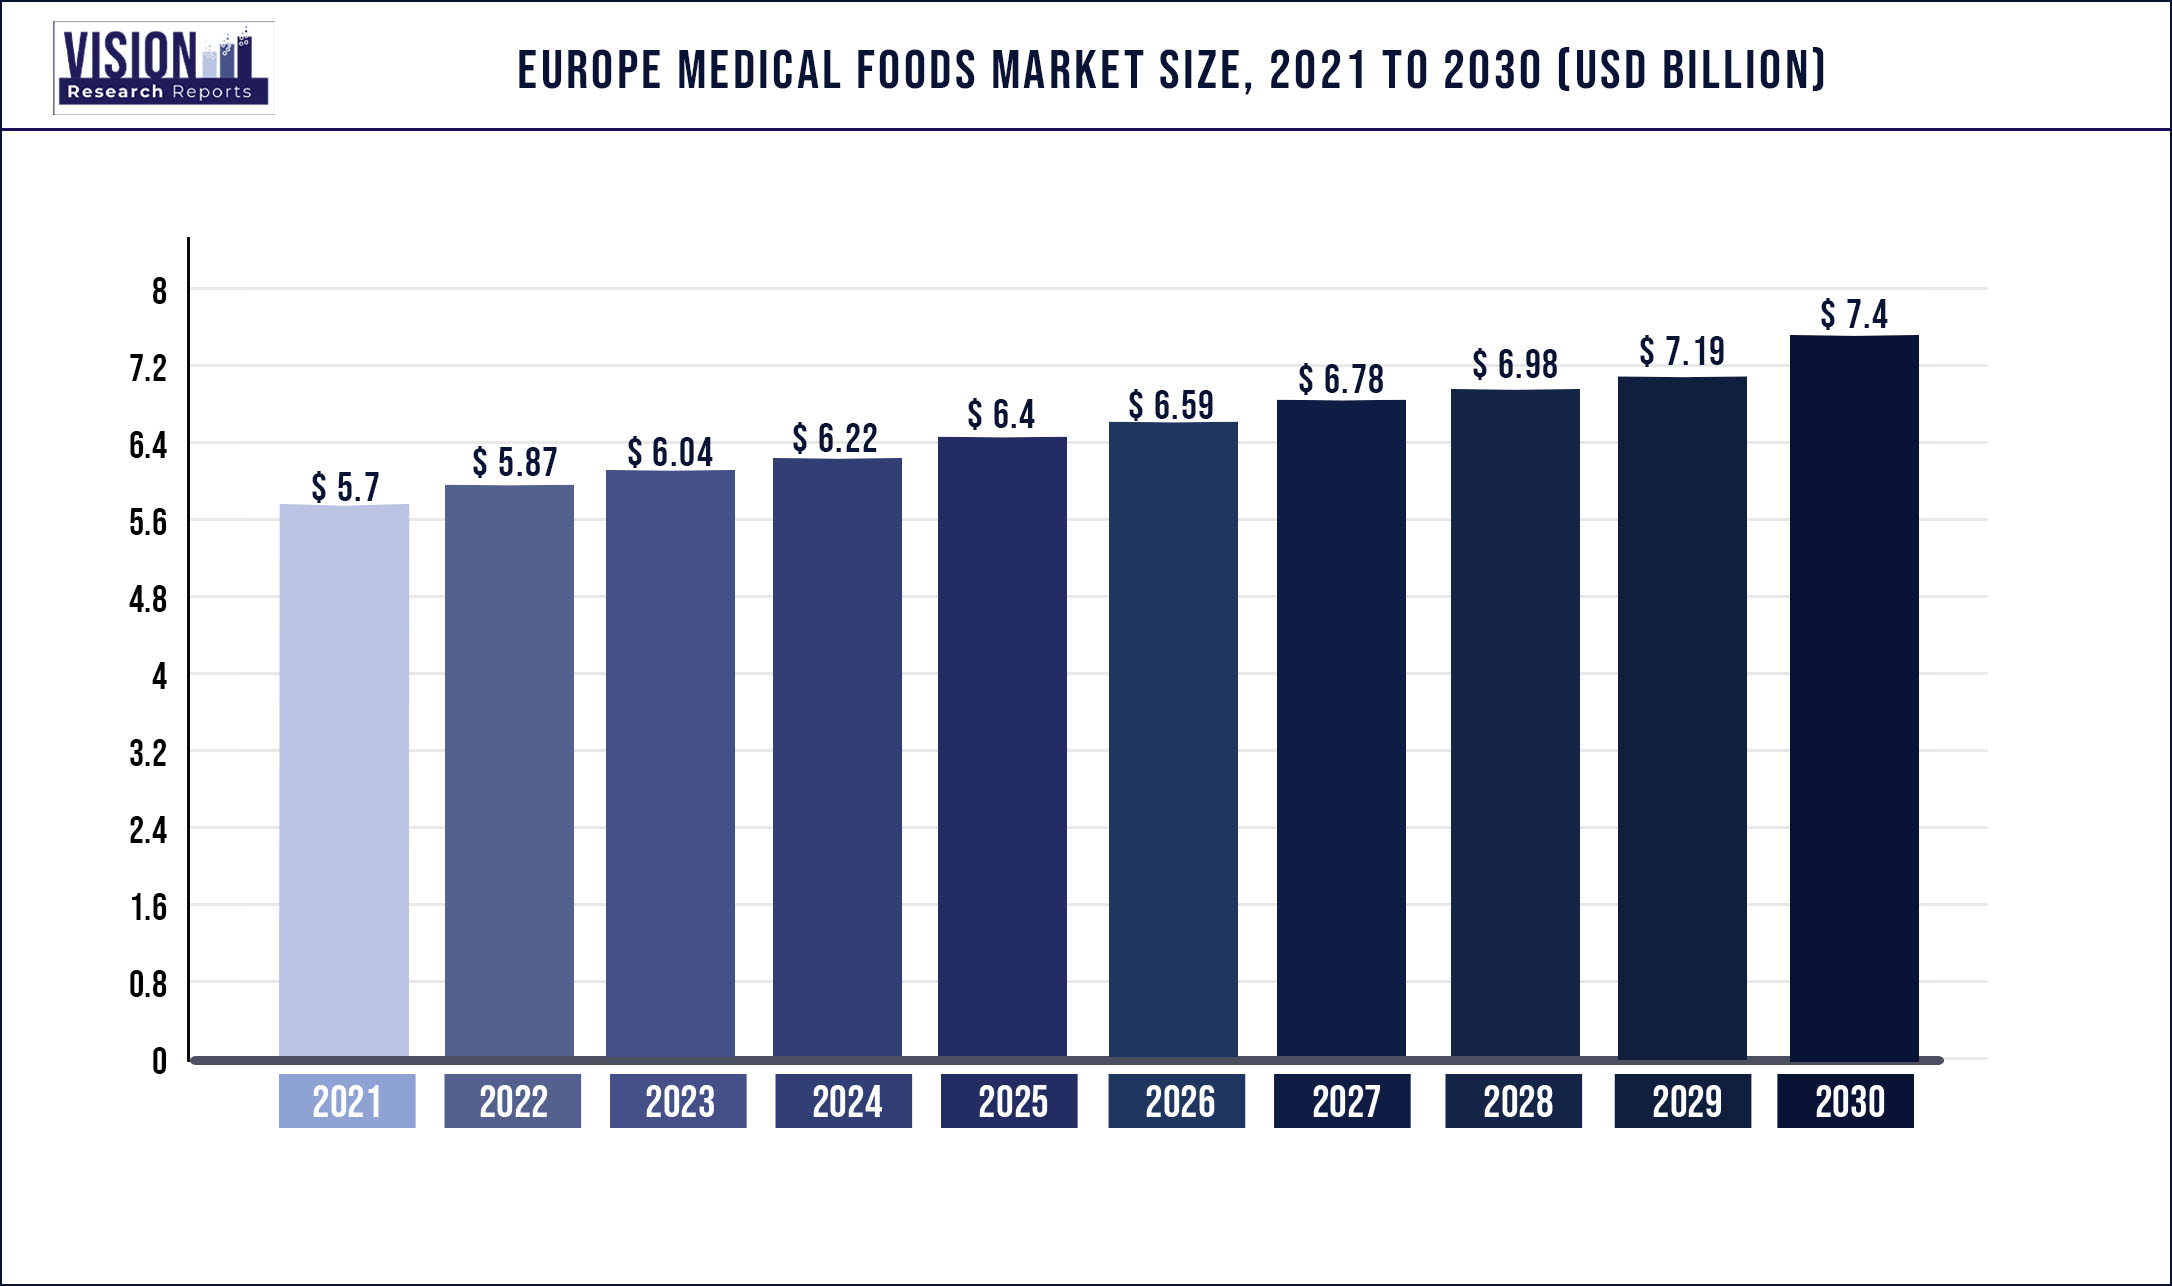 Europe Medical Foods Market Size 2021 to 2030